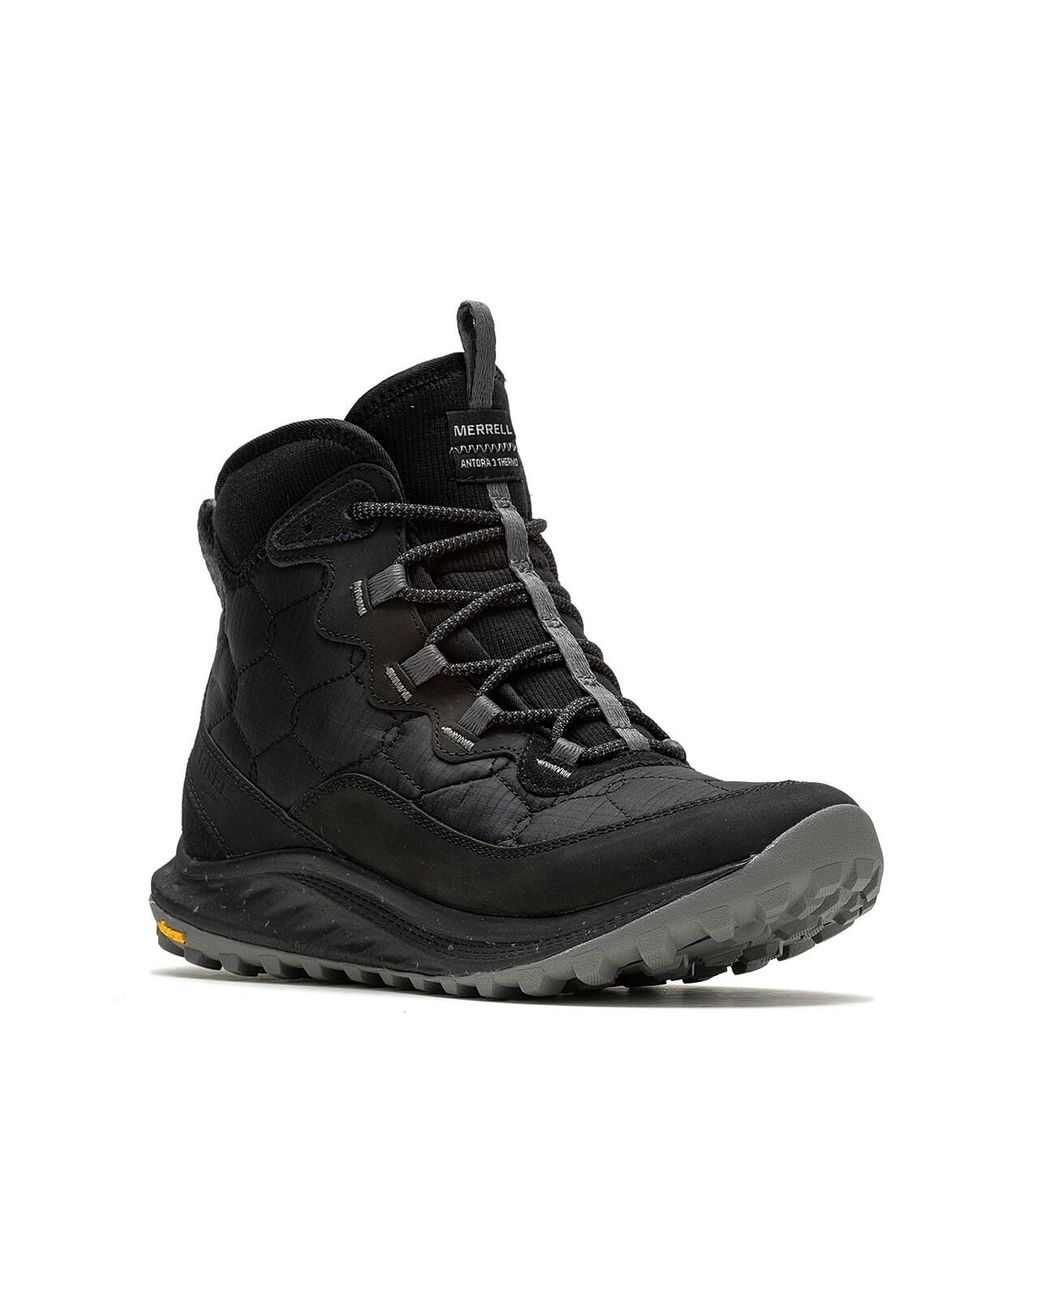 Merrell Antora 3 Thermo Hiking Boot in Black | Lyst